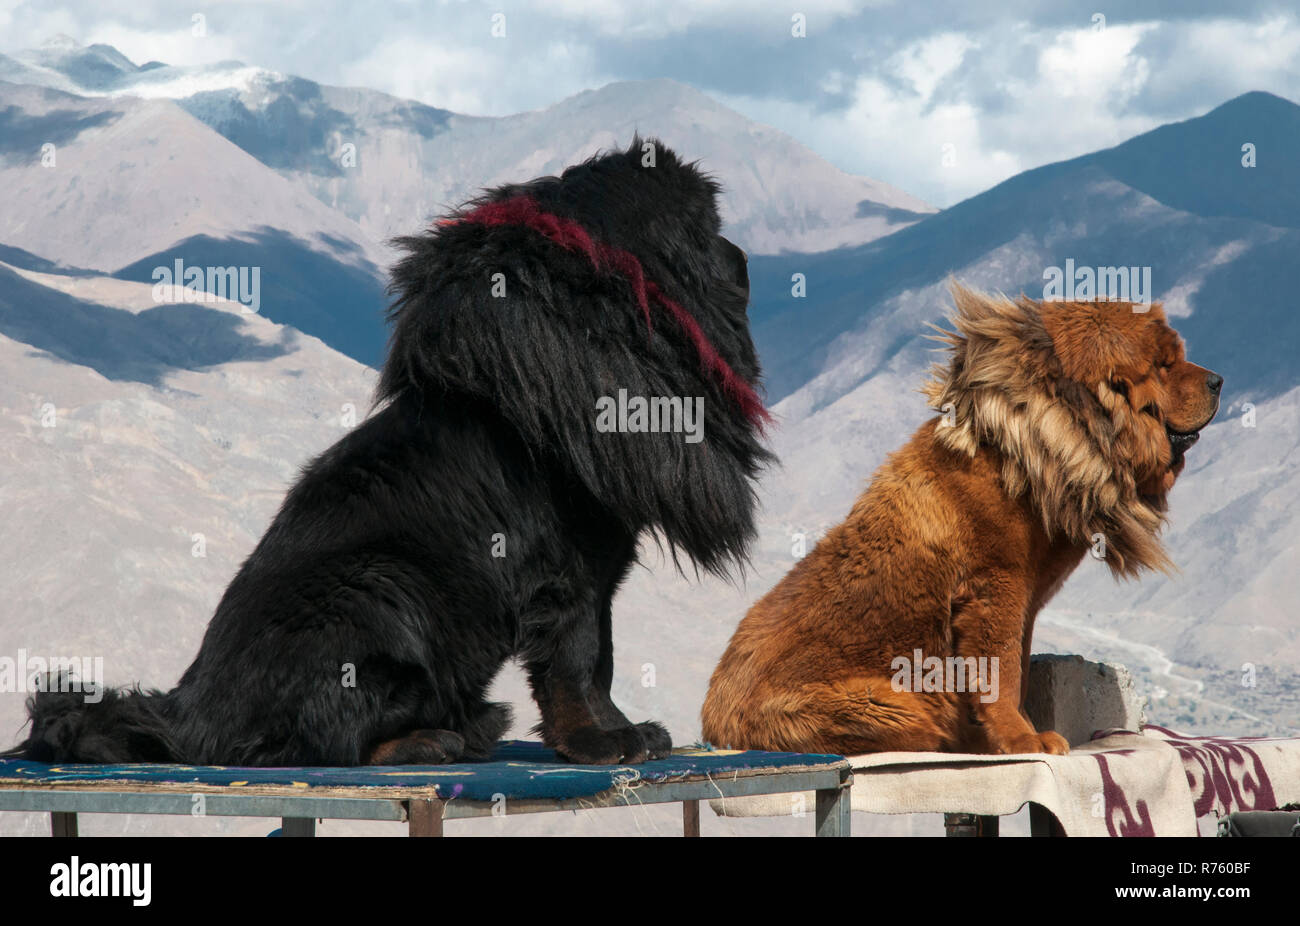 Formidable native mastiffs, Tibetan dogs almost the size of lions greet tourists arriving at a roadside lookout, Tibet, China Stock Photo